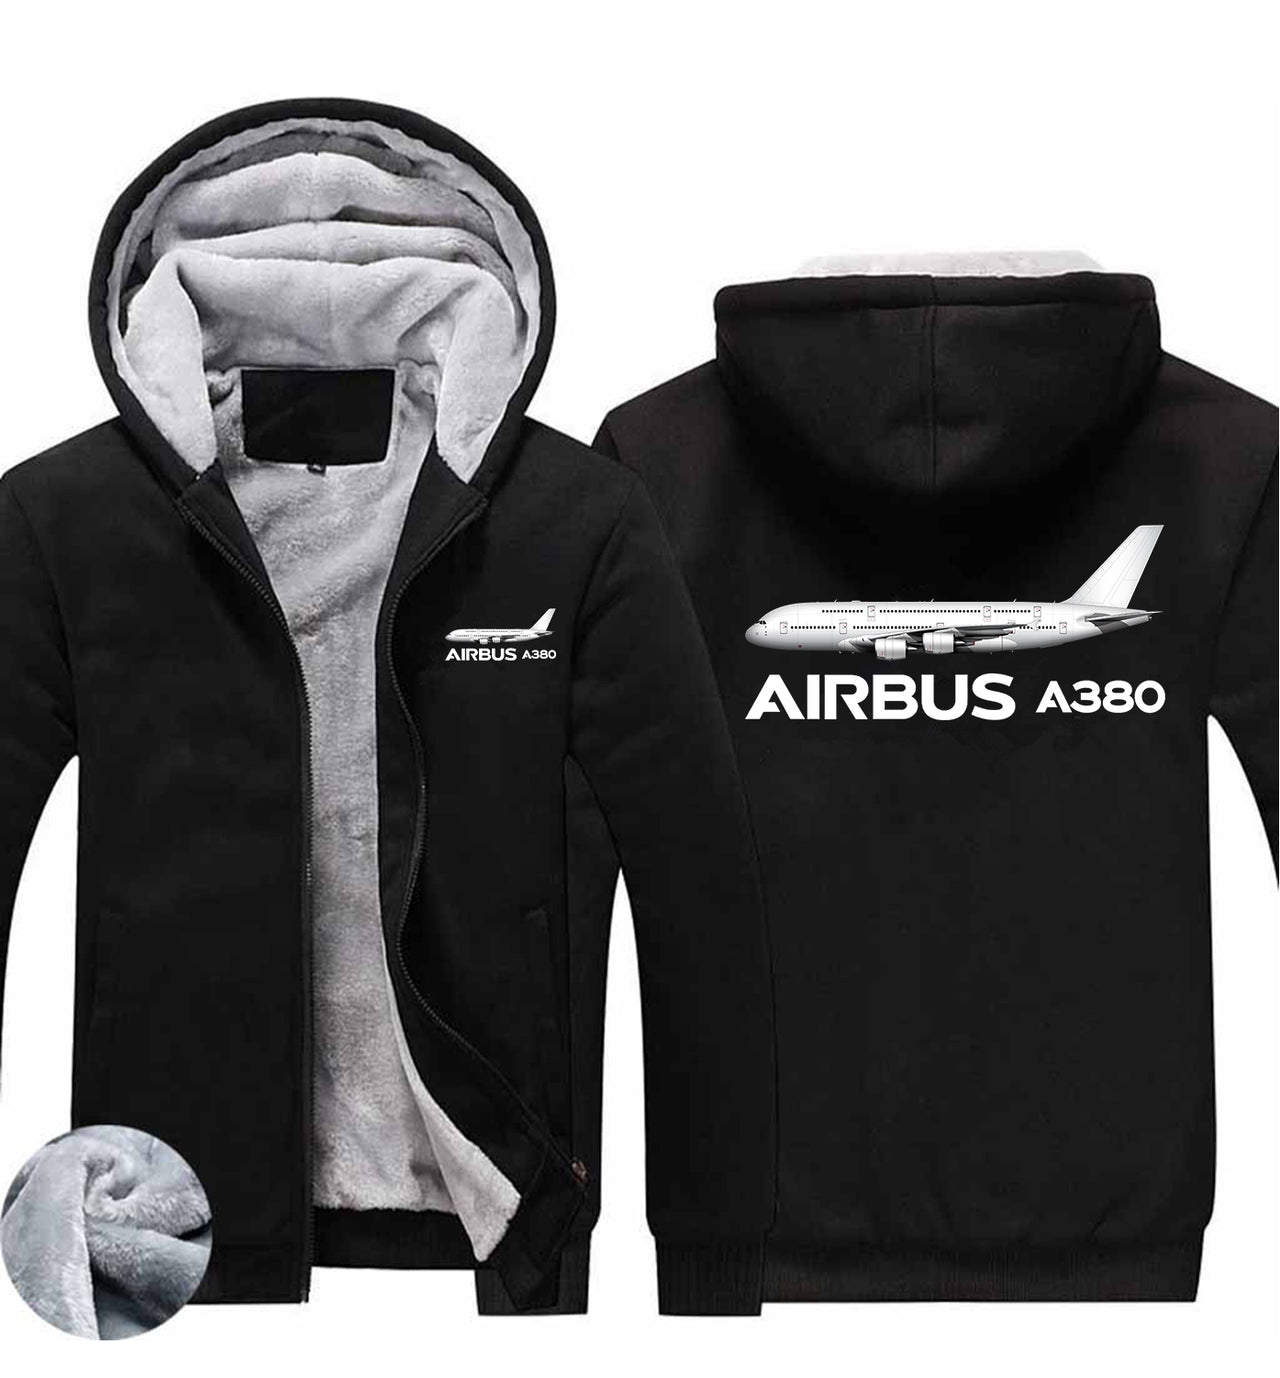 The Airbus A380 Designed Zipped Sweatshirts